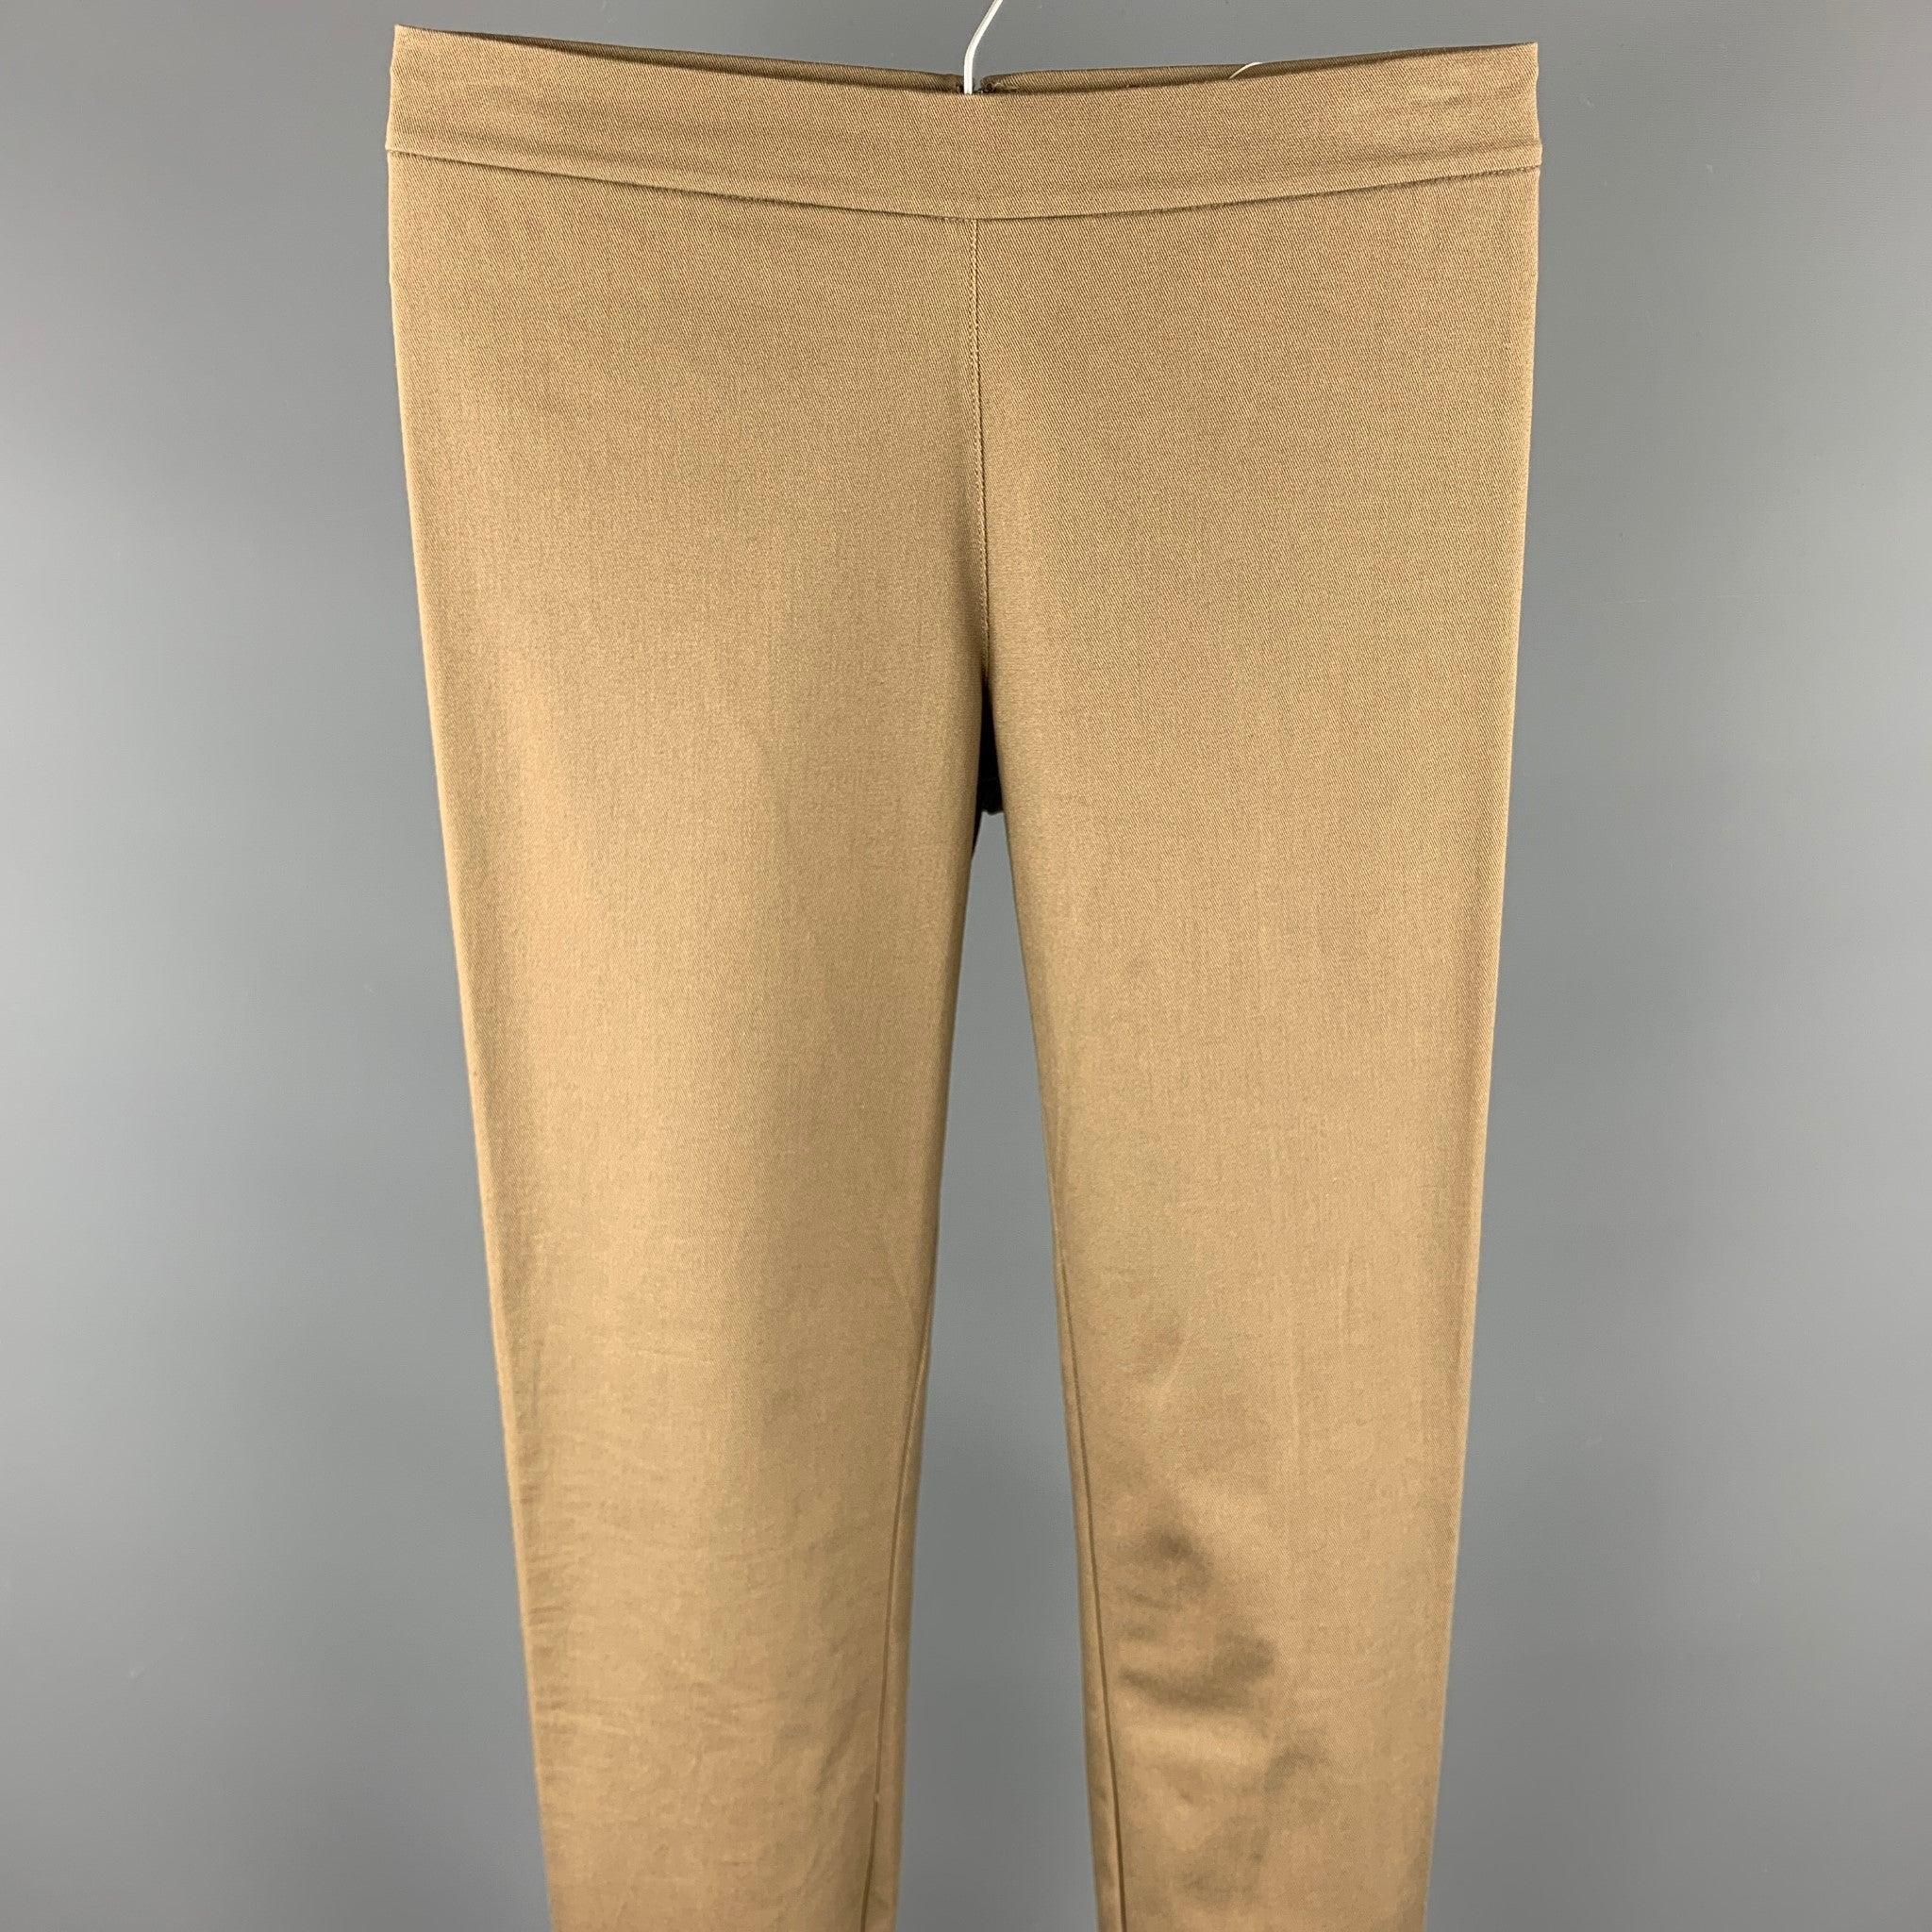 RALPH LAUREN leggings comes in a khaki twill cotton featuring a back zip up closure.
Very Good Pre-Owned Condition. 

Marked:   2 

Measurements: 
  Waist: 28 inches 
Rise: 8 inches 
Inseam: 28 inches 
  
  
 
Reference: 92891
Category: